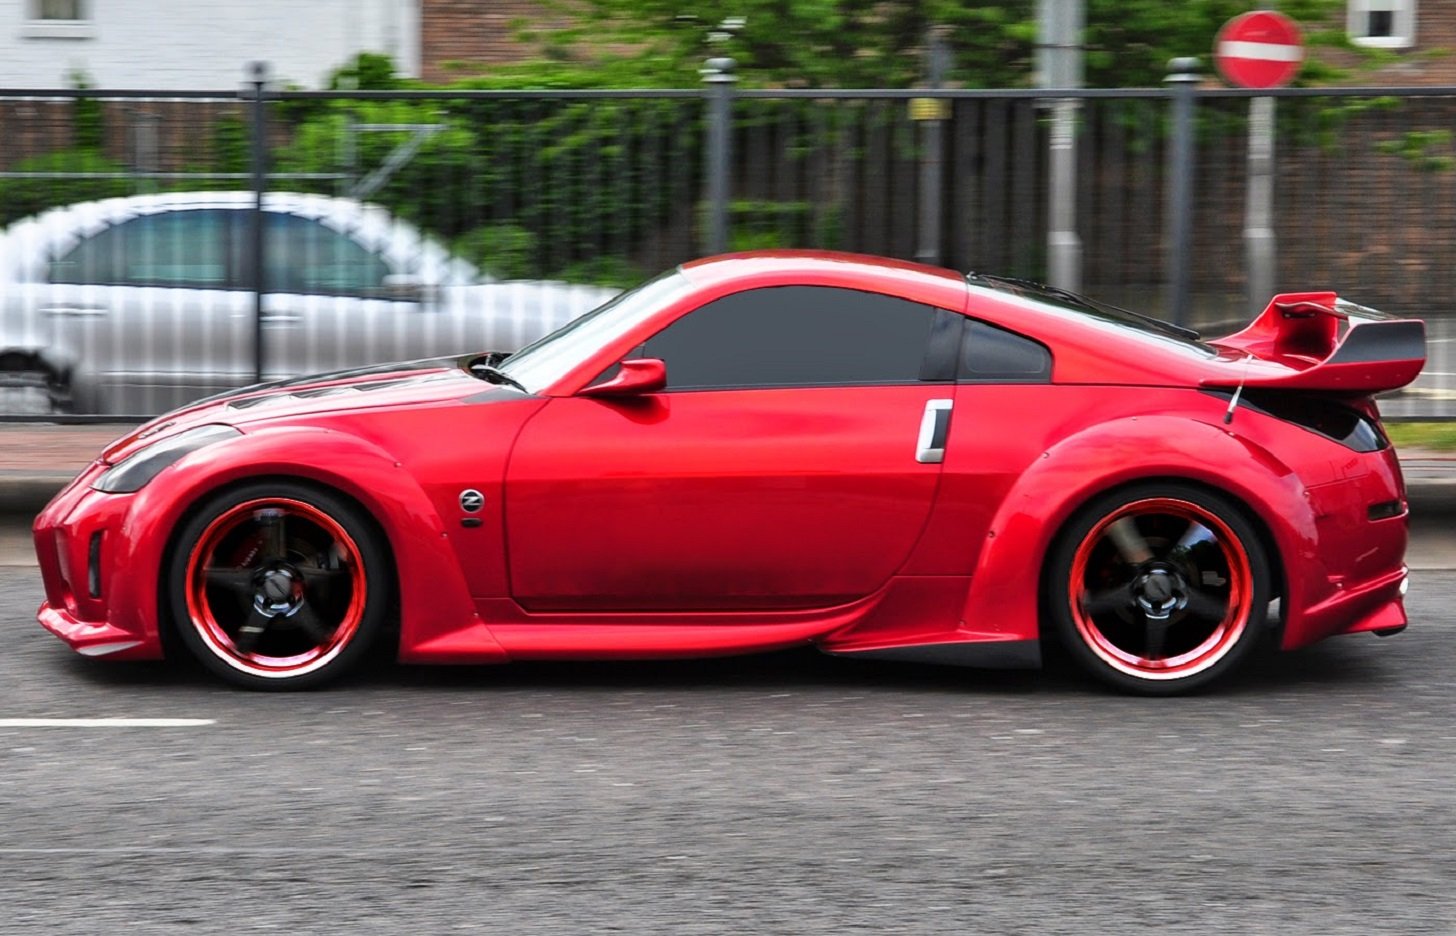 350z, Cars, Coupe, Japan, Nissan, Tuning Wallpapers HD / Desktop and